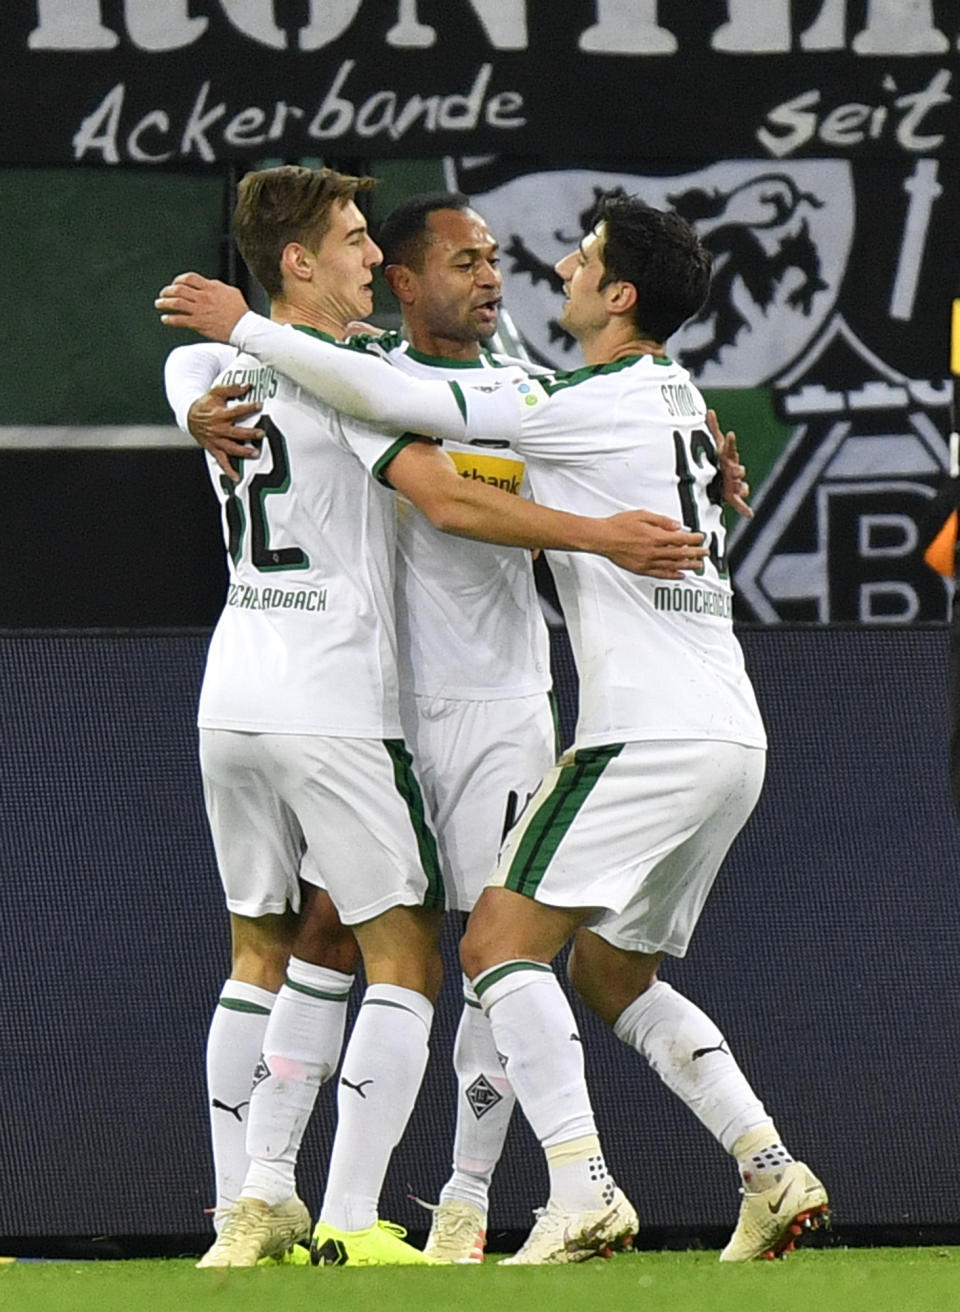 Moenchengladbach's Raffael celebrates with Moenchengladbach's Florian Neuhaus, left, and Moenchengladbach's Lars Stindl, right, after scoring the opening goal during the German Bundesliga soccer match between Borussia Moenchengladbach and VfB Stuttgart in Moenchengladbach, Germany, Sunday, Dec. 9, 2018. (AP Photo/Martin Meissner)